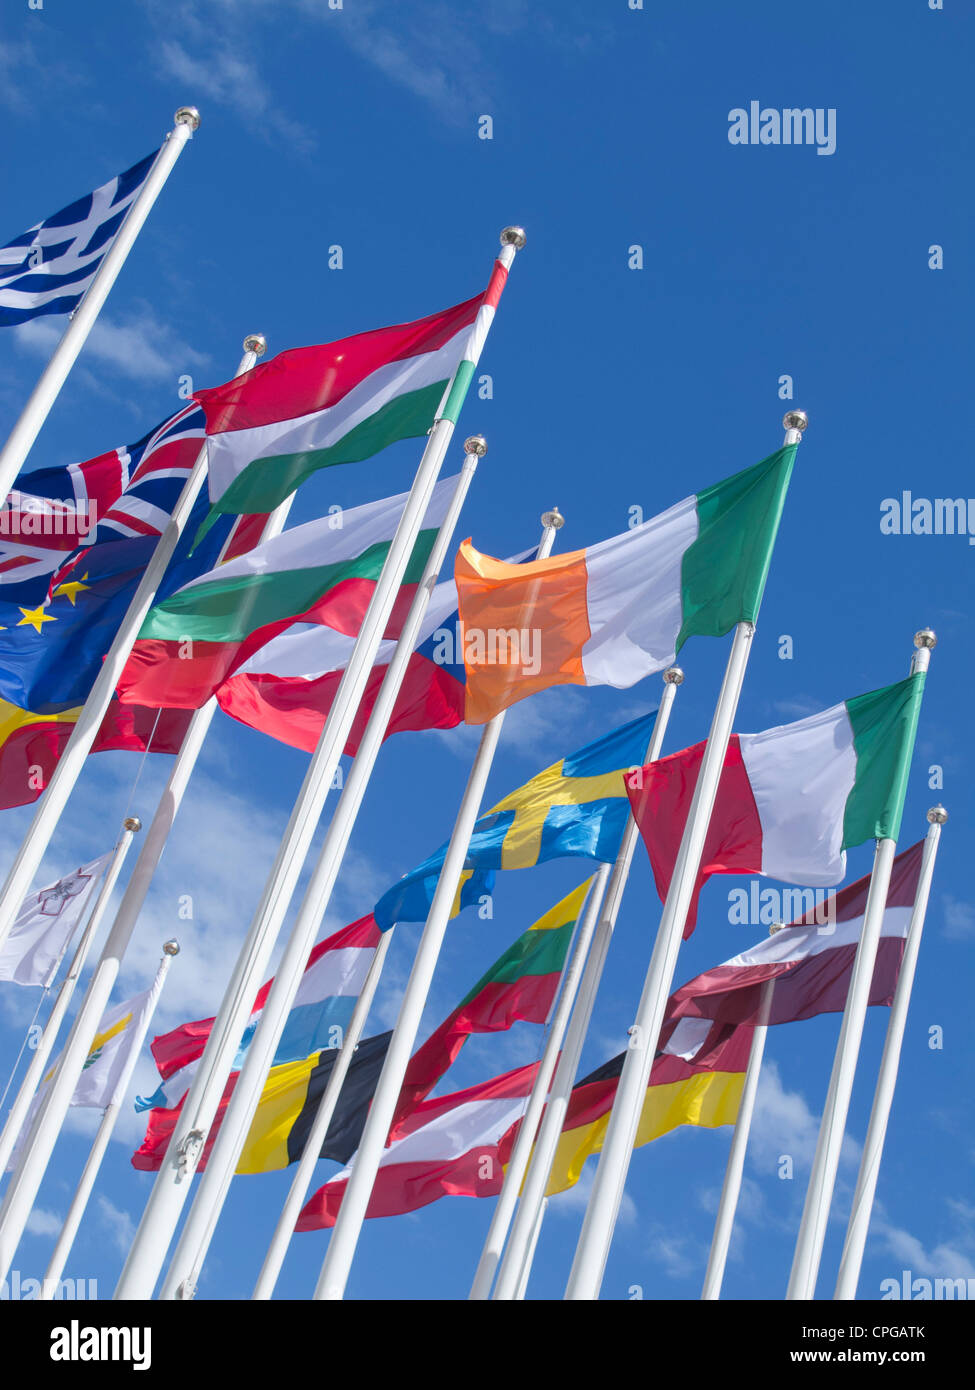 Flags of many nations flying Stock Photo